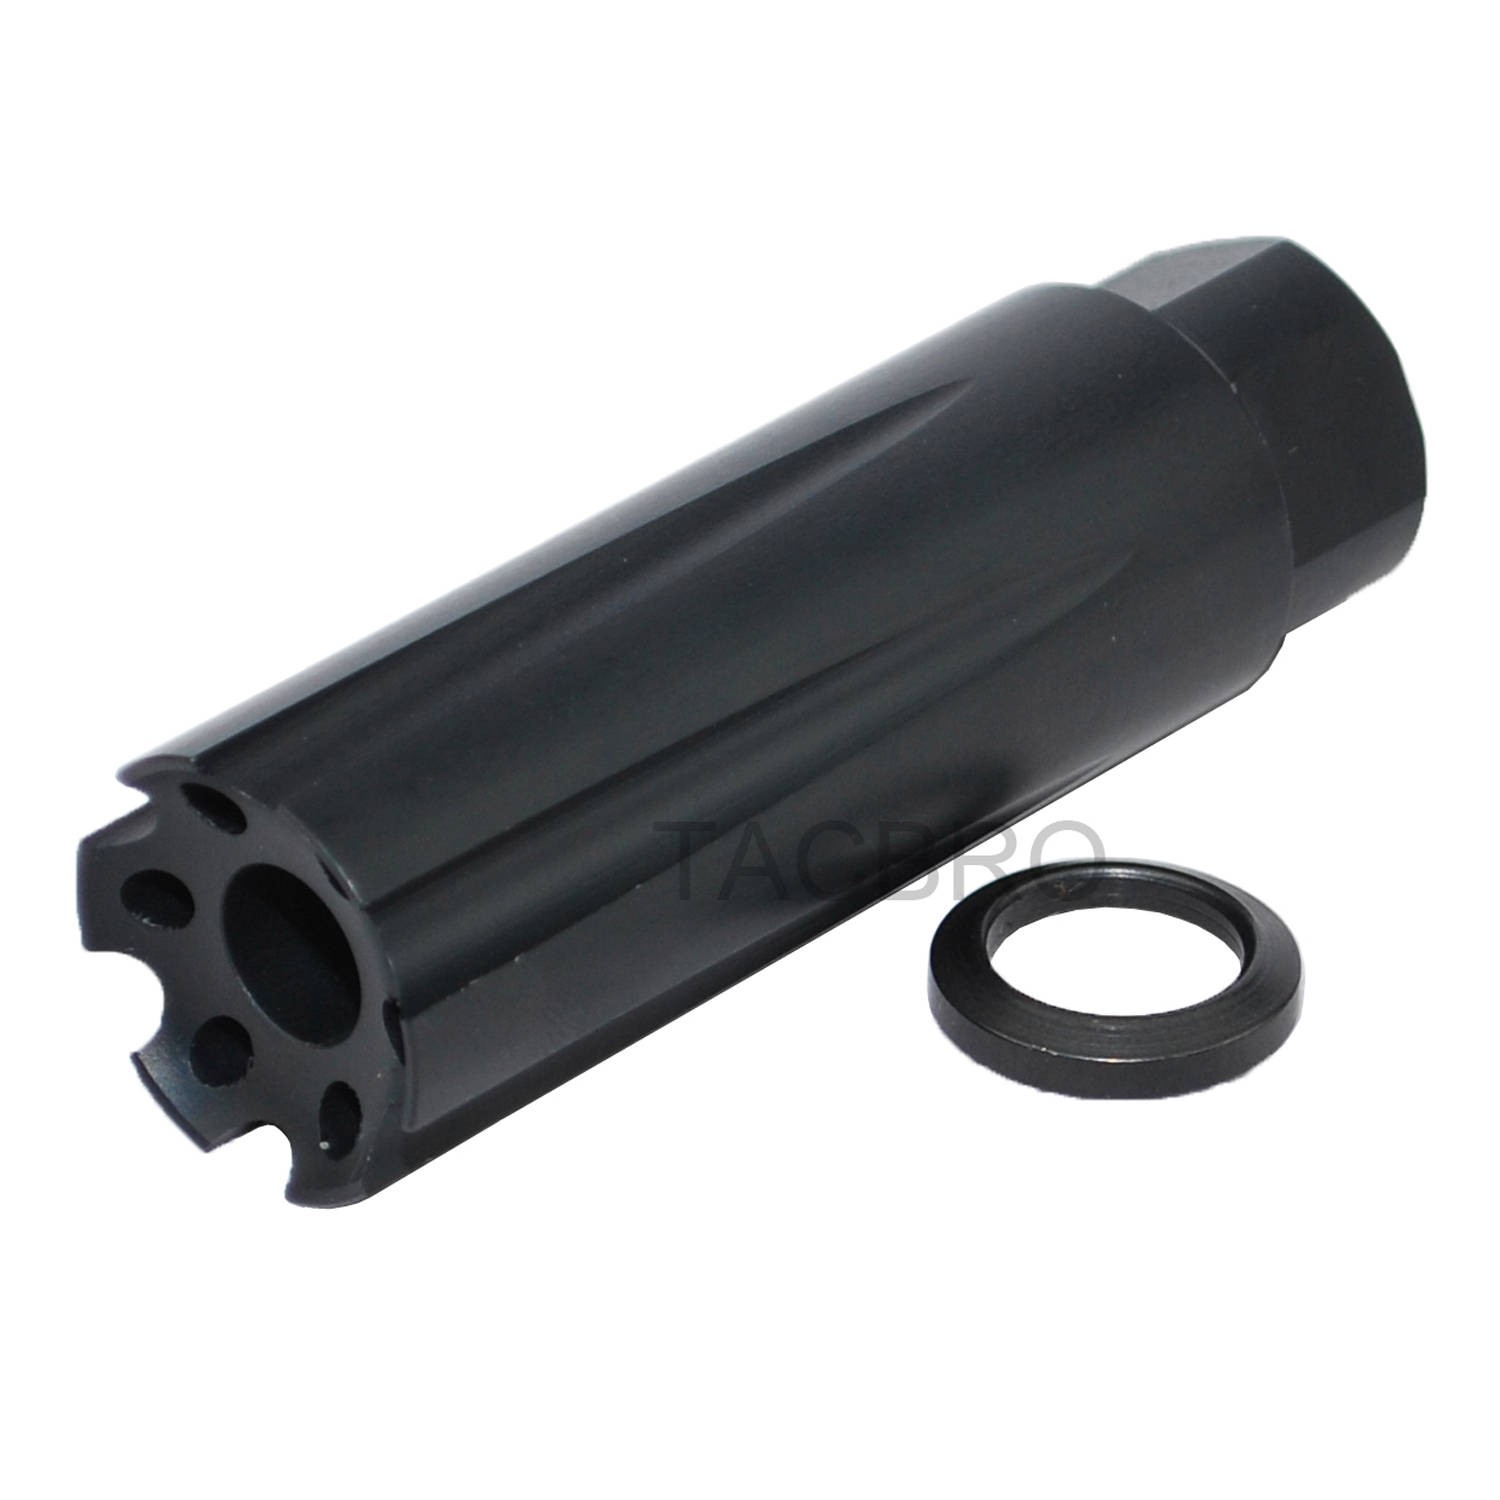 US Sell Ruger PC Carbin 9 mm Low Concussion Muzzle Brake Anodized Black 